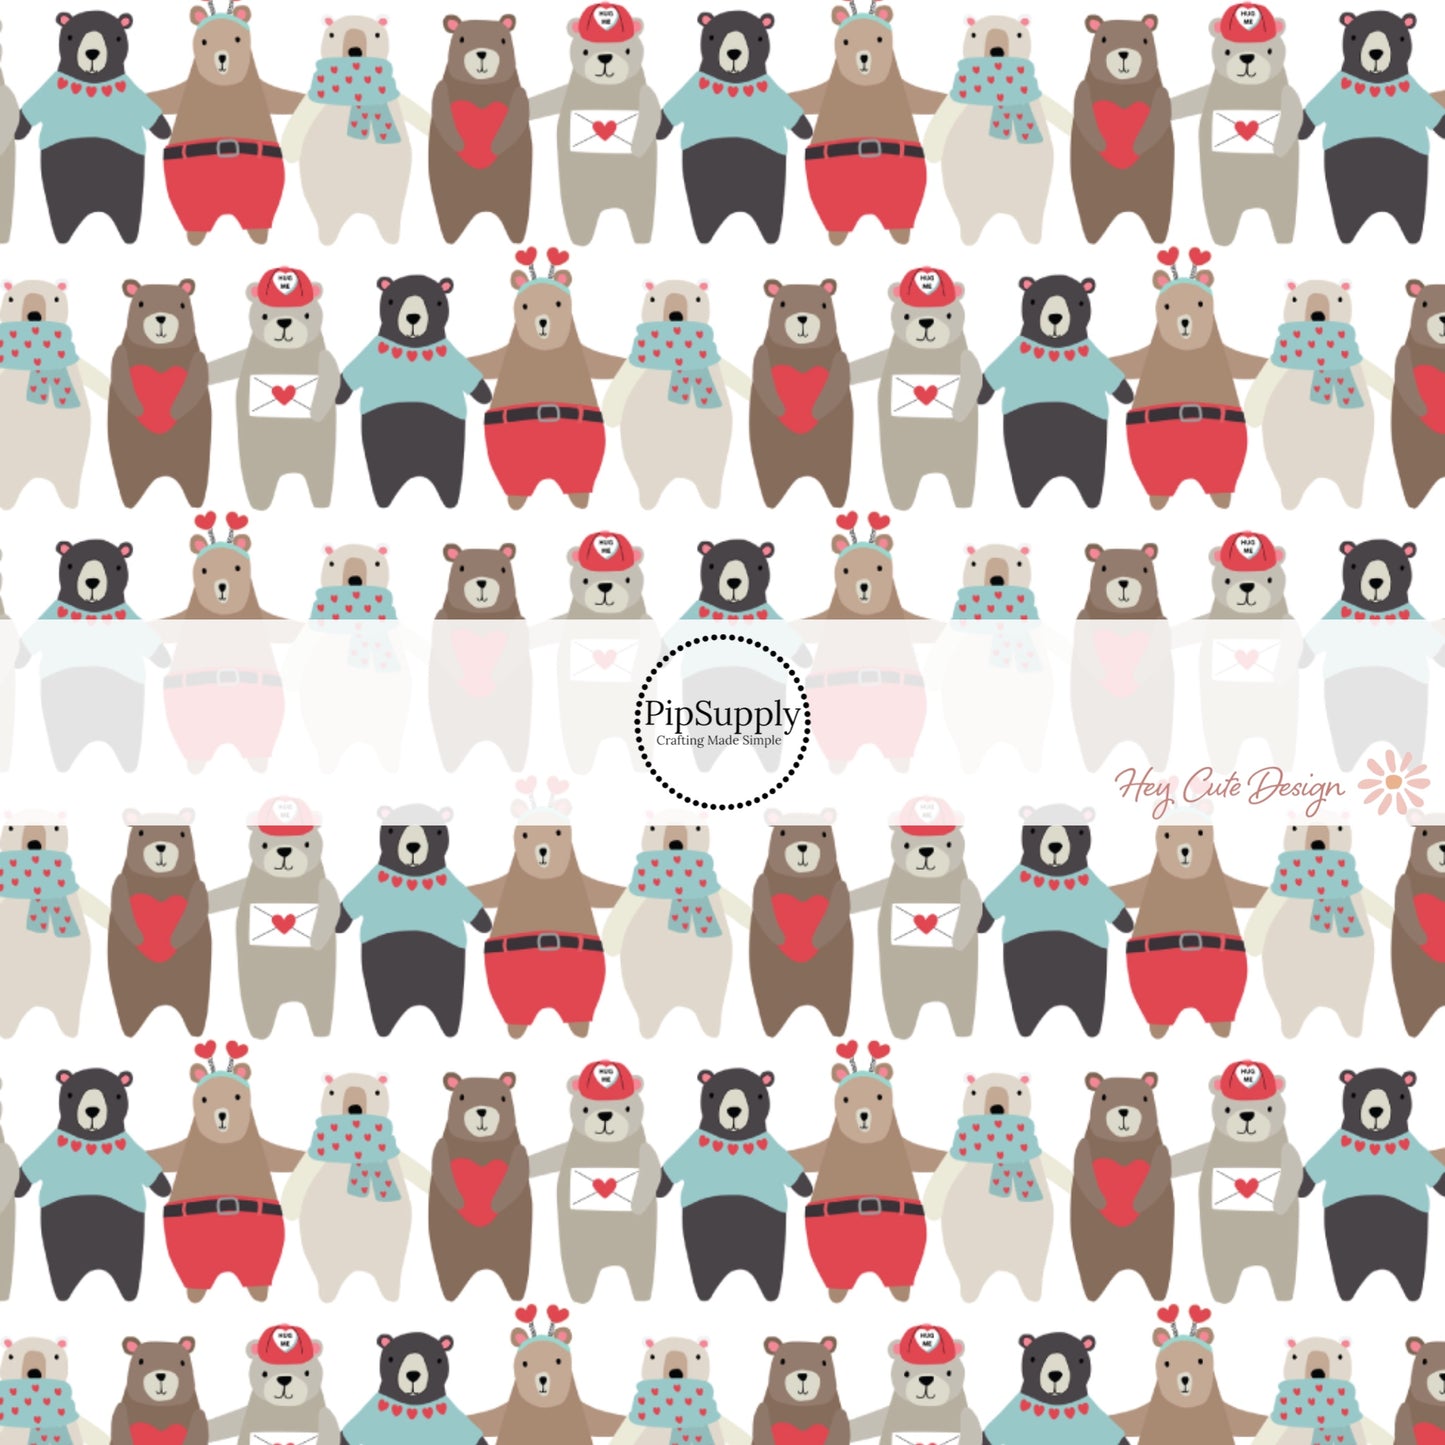 White fabric by the yard with black, gray, and beige cartoon bears